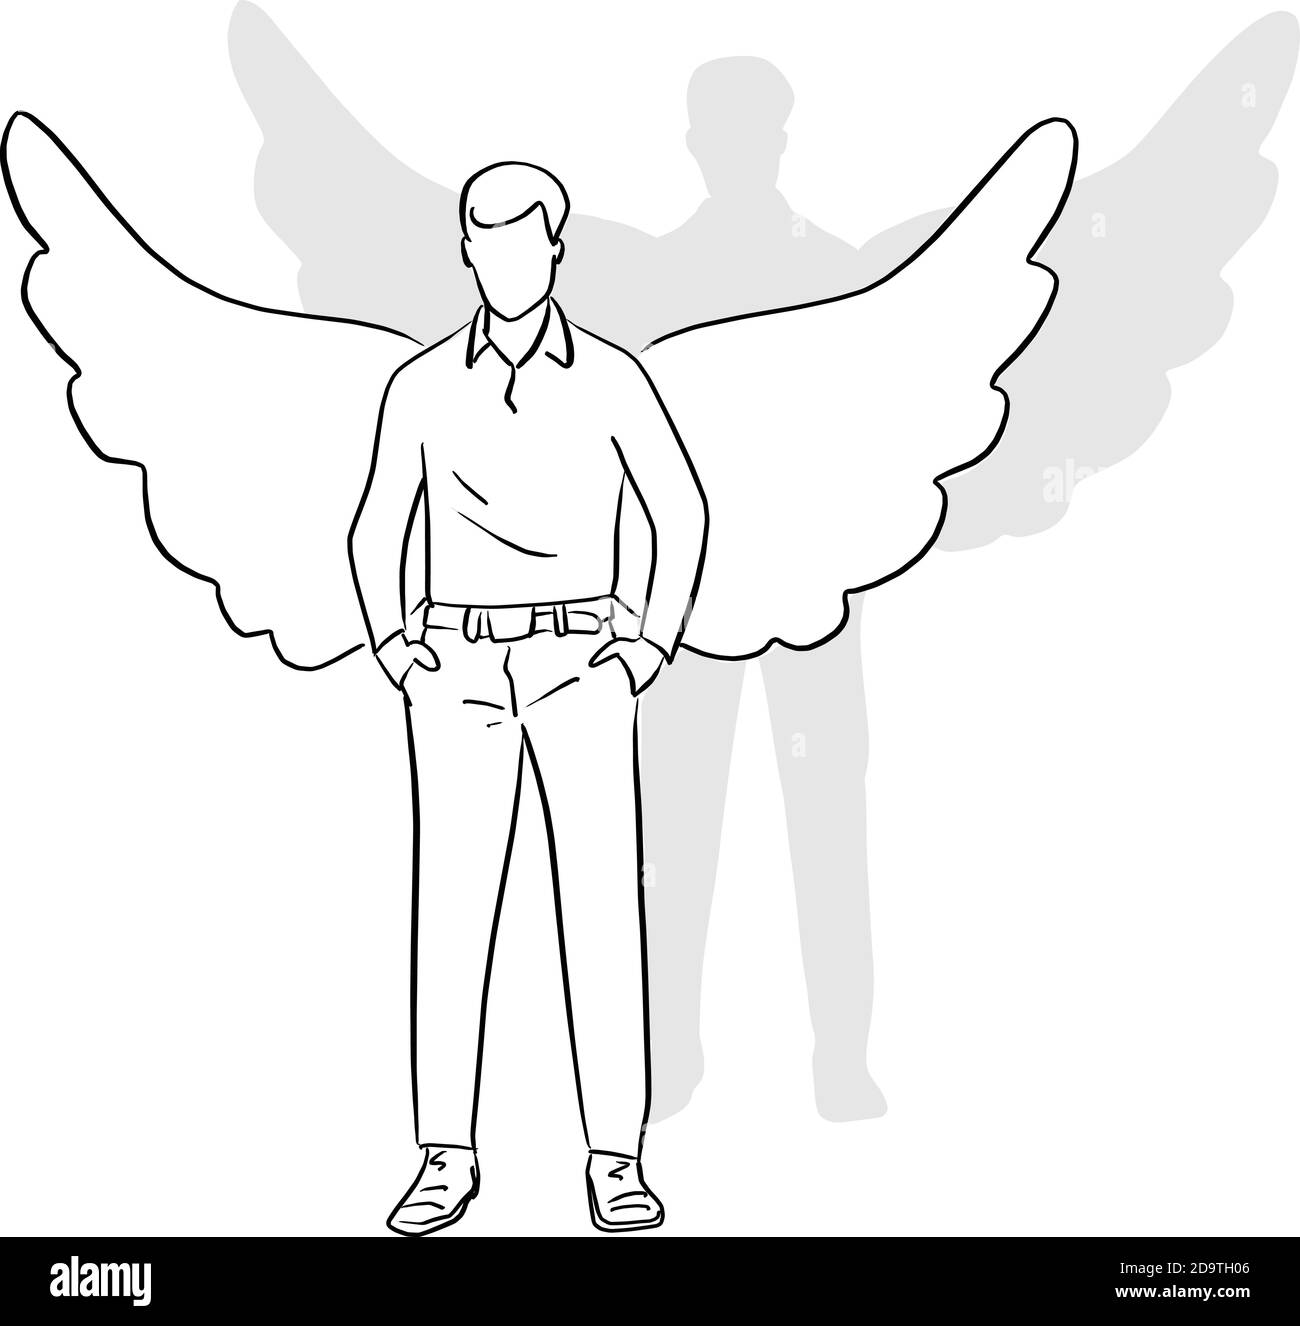 full length of man standing with wings on his back vector illustration sketch doodle hand drawn with black lines isolated on white background Stock Vector